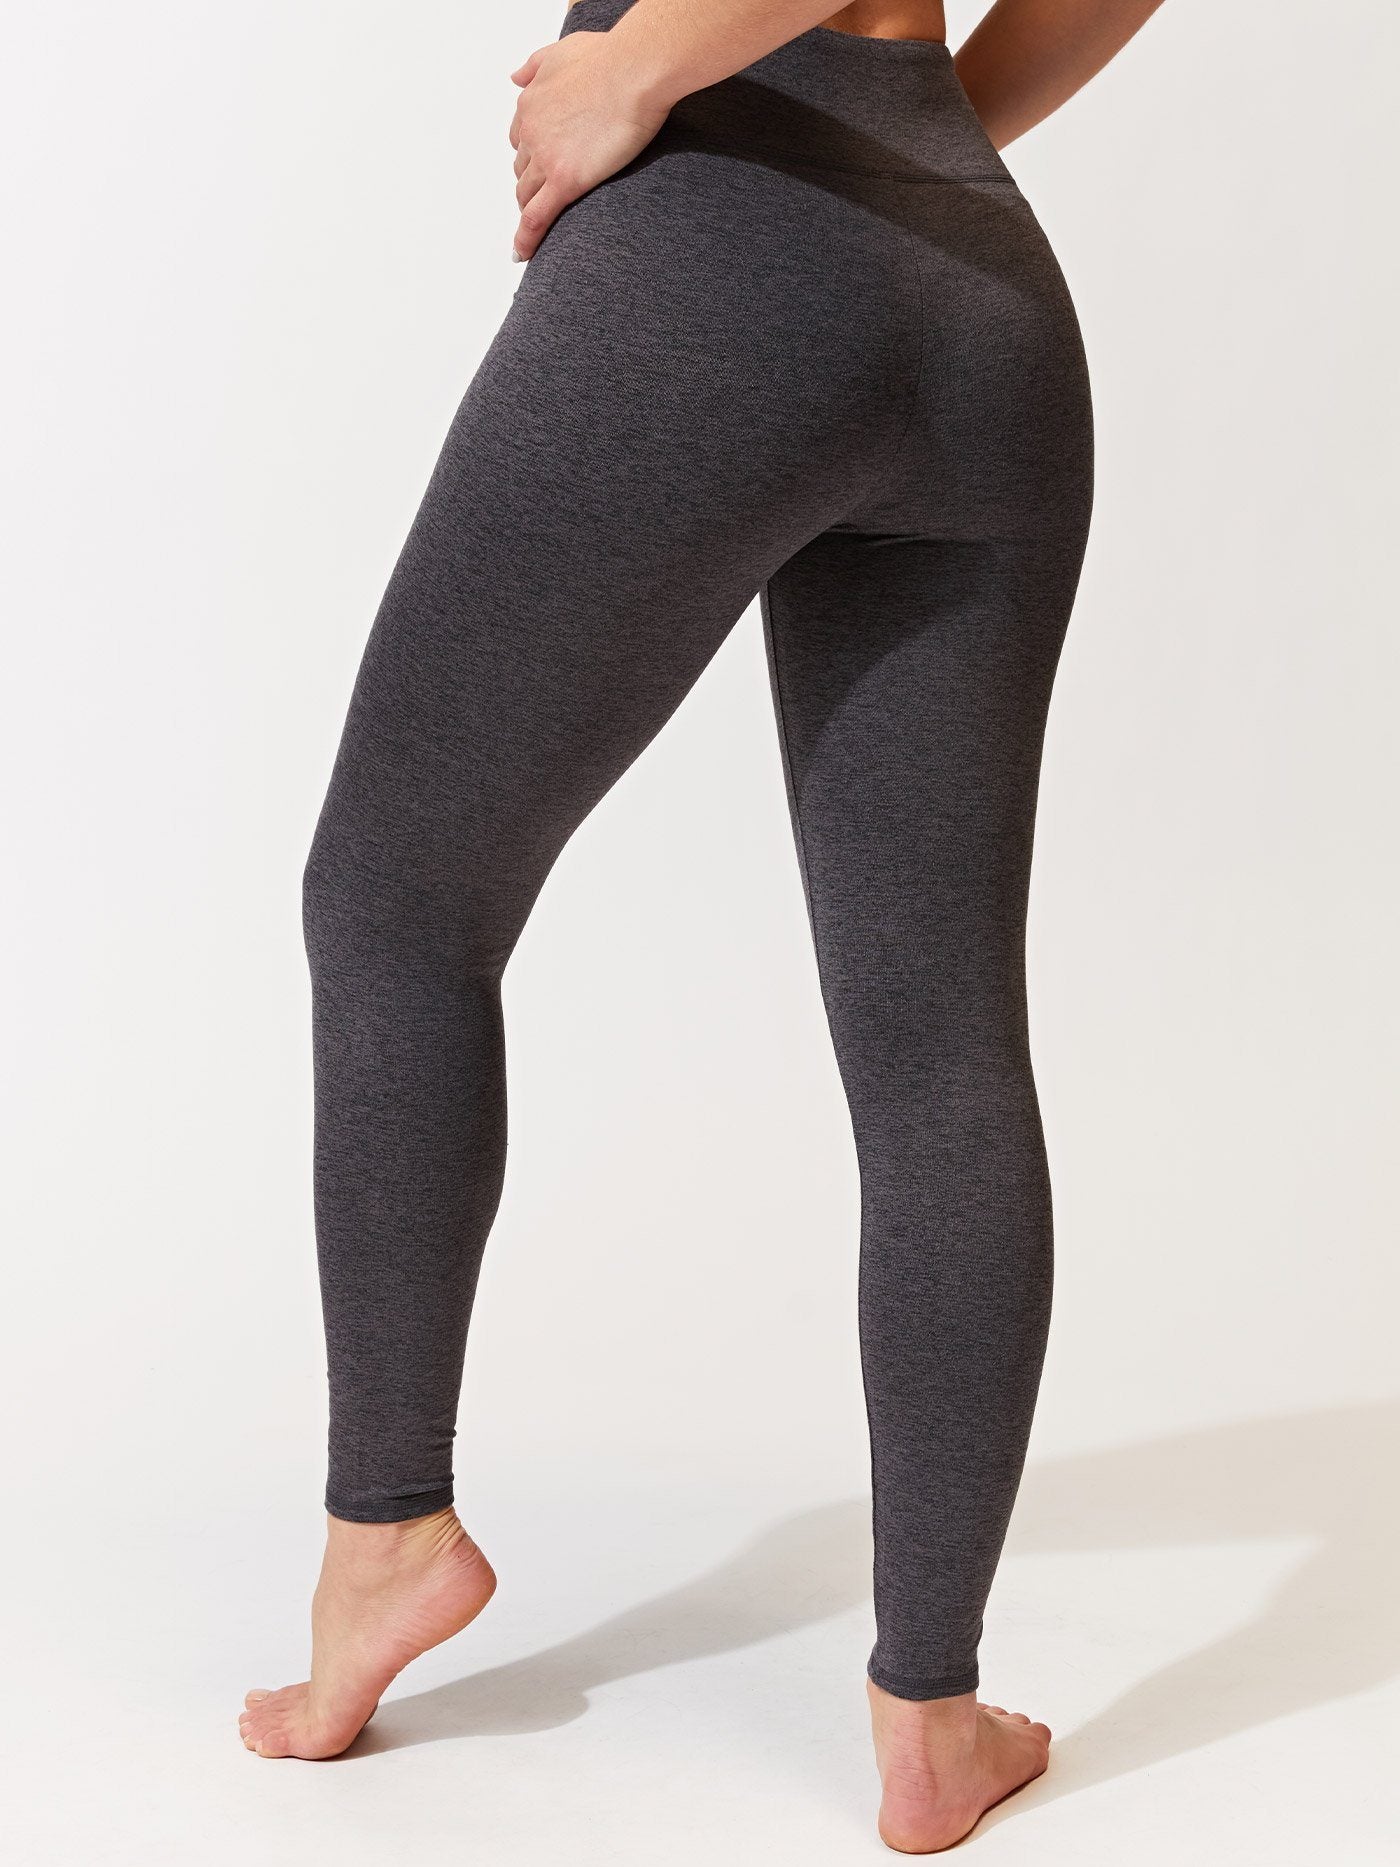 Campsnail 4 pack, high waisted  leggings, feels amazingly